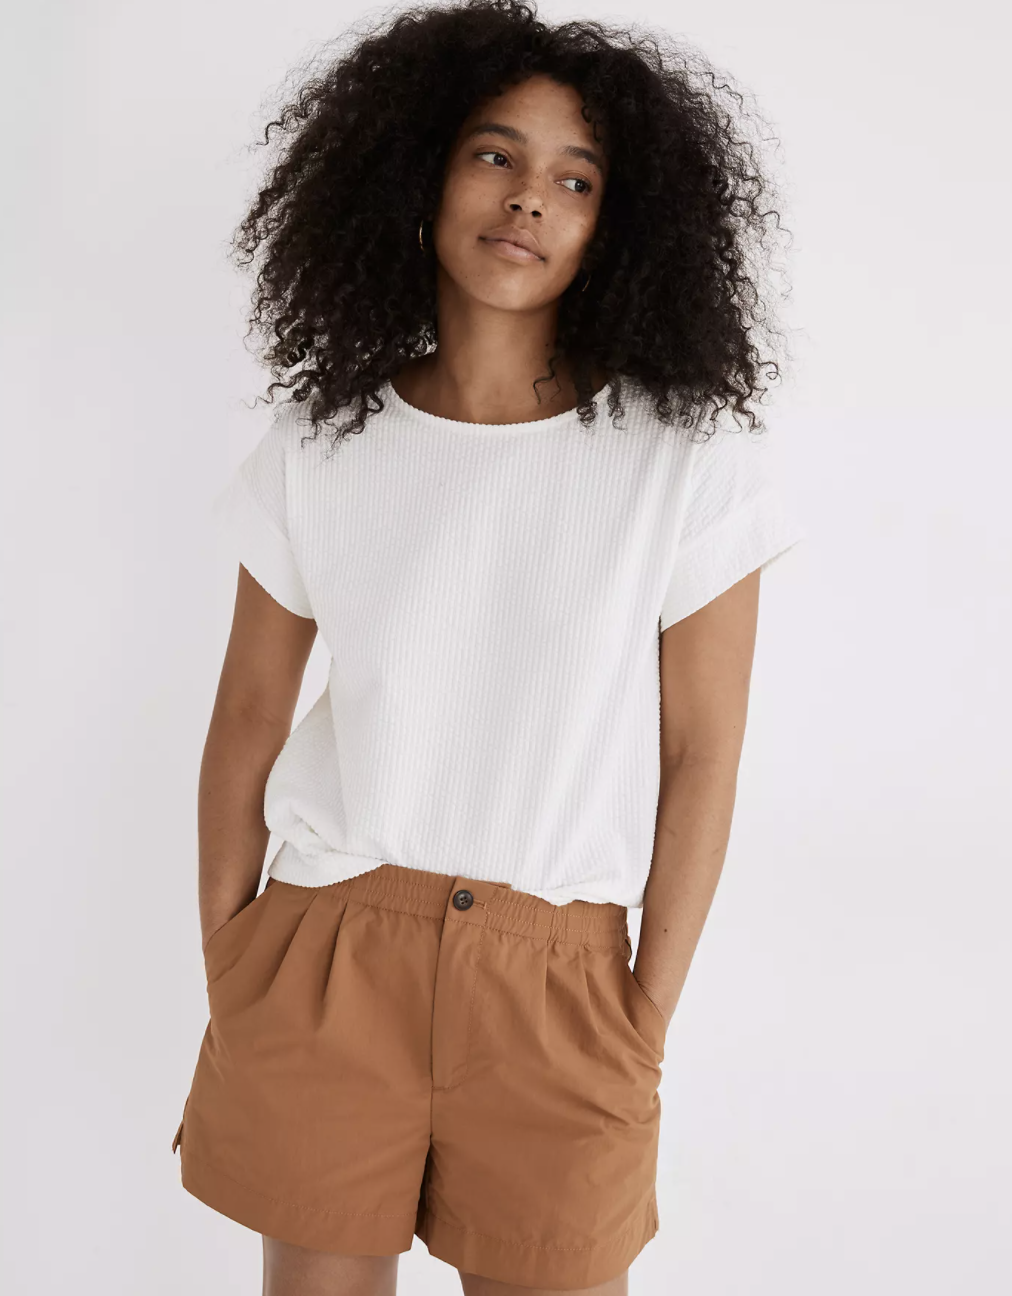 The 7 Best Shorts Brands for Women in 2021 | Who What Wear